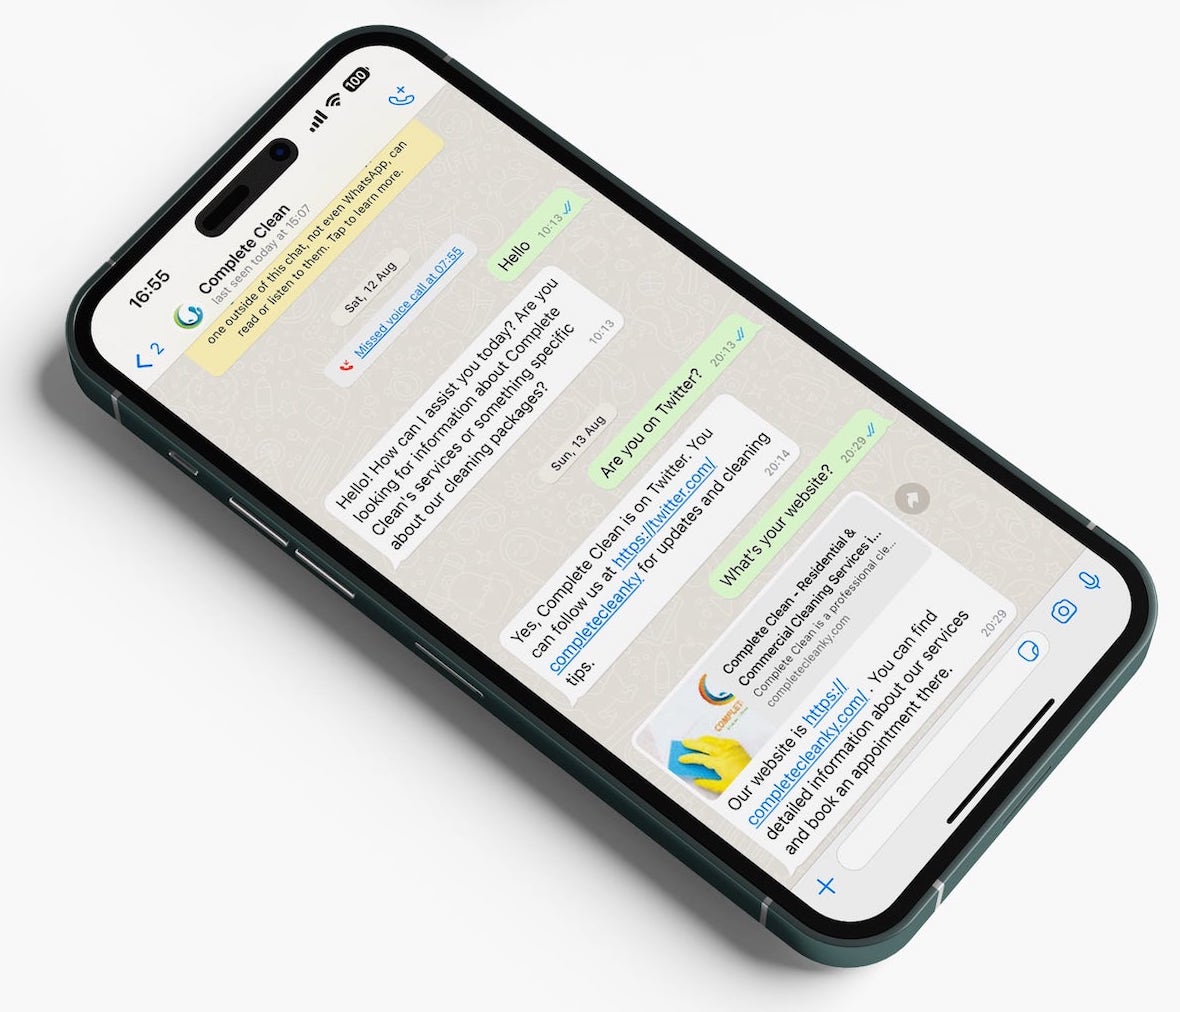 Cayman Islands-based Cleaning Company Complete Clean Transforms Customer Communication with AI-powered WhatsApp Integration